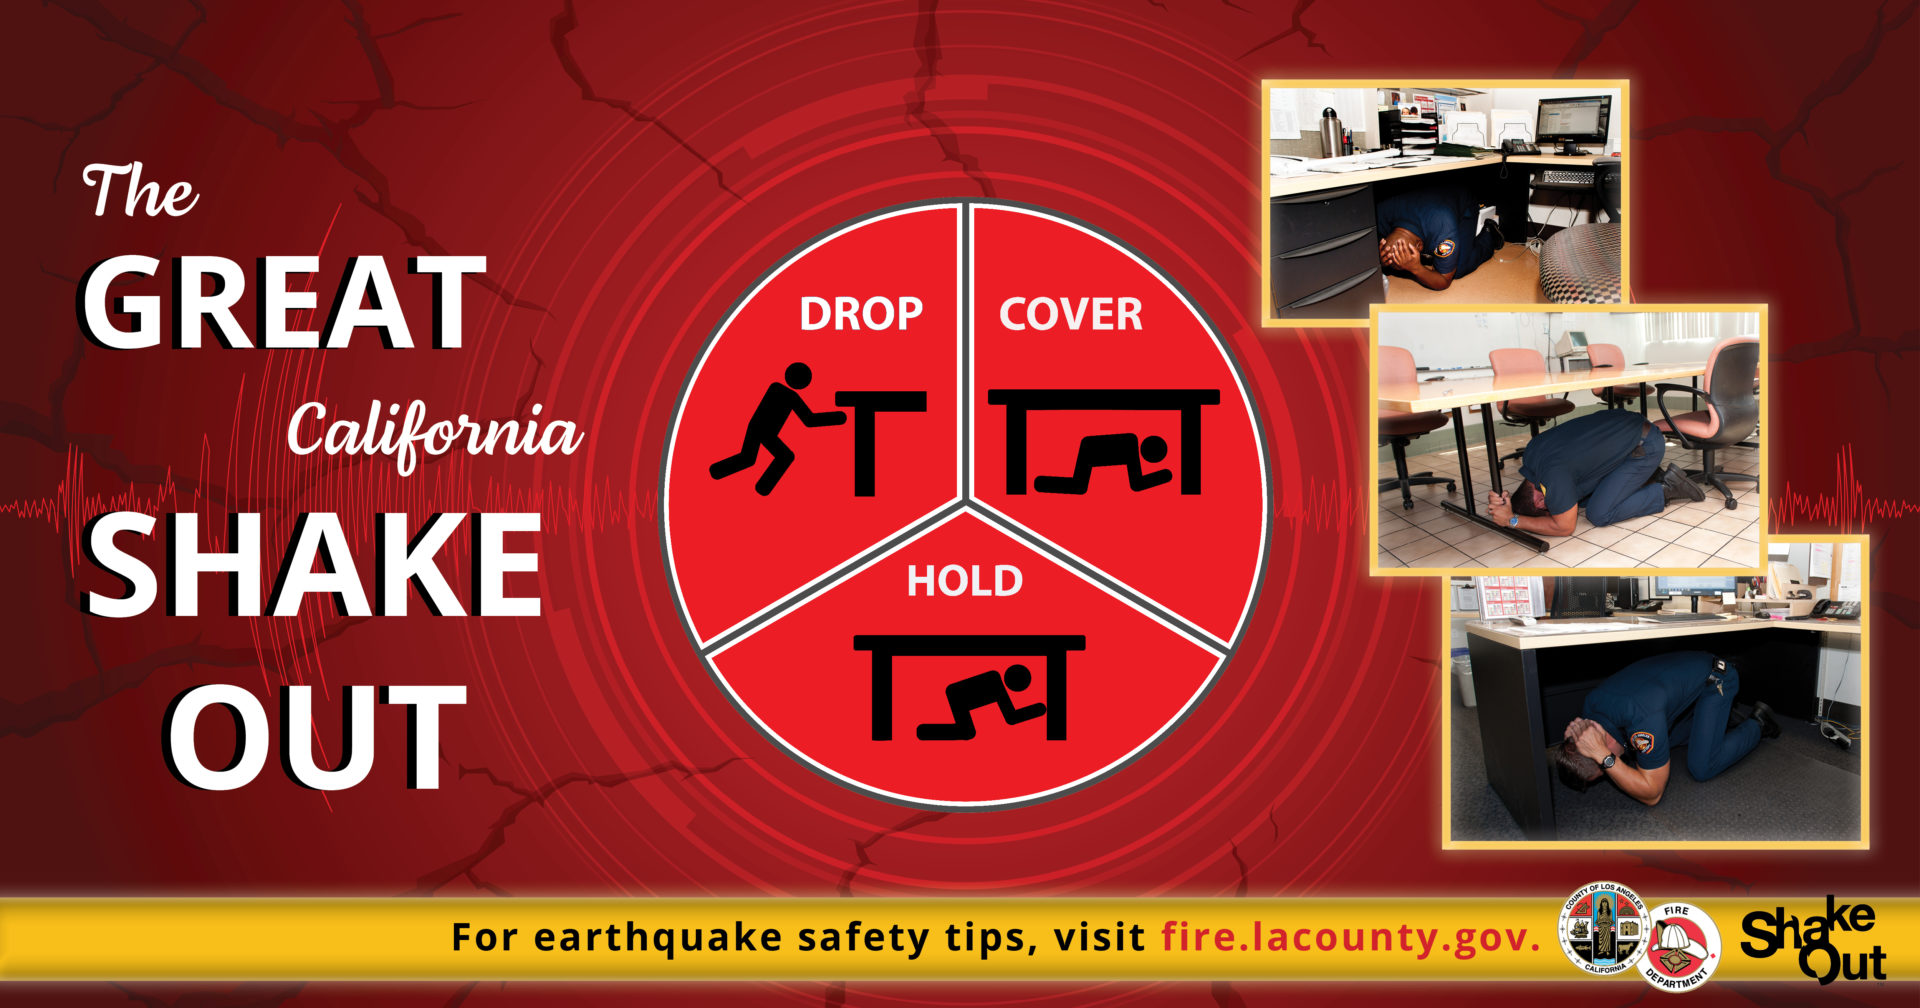 At exactly 10:20 a.m., on Thursday, October 20, 2022, the Los Angeles County Fire Department (LACoFD) joined millions of other Californians in the annual Shakeout Earthquake Exercise by performing the “drop, cover, and hold on” drill and conducting a post-earthquake emergency exit drill.